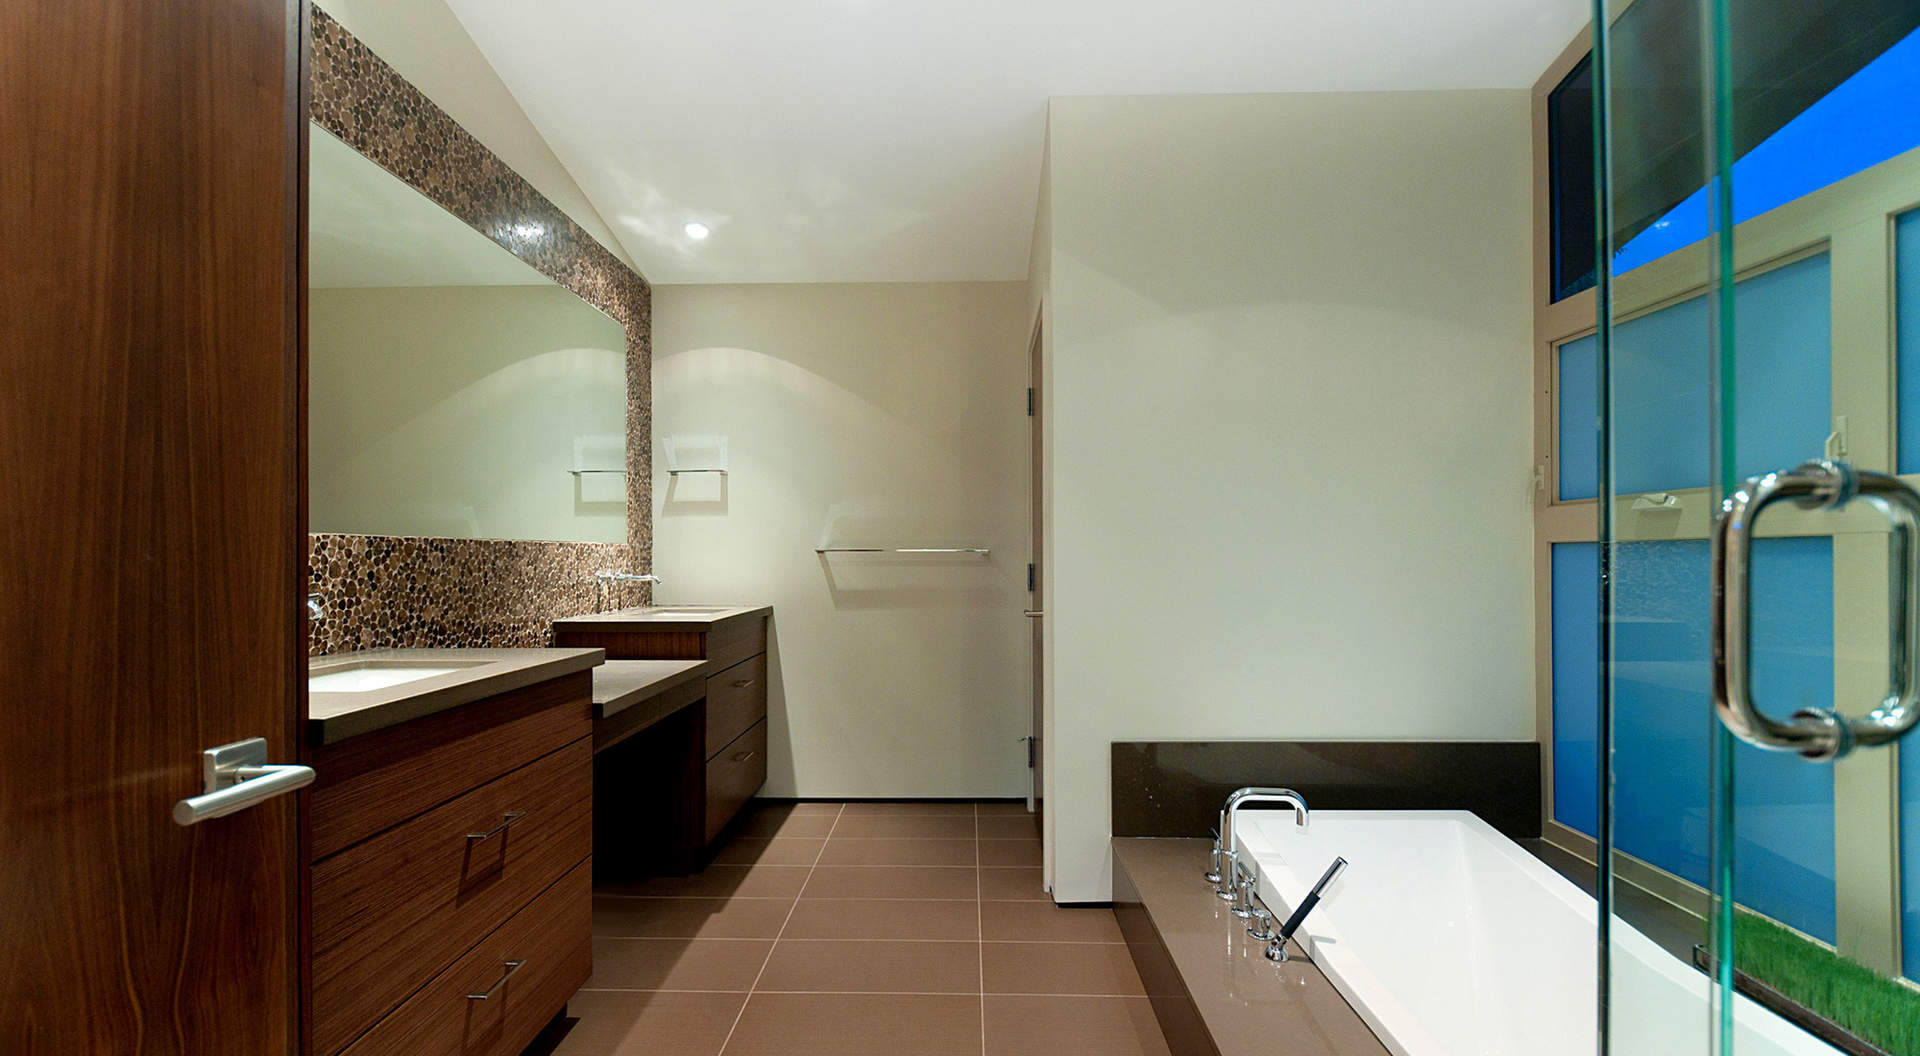 Spa-Like Master Ensuite with walk-in Shower and Large Soaker Tub